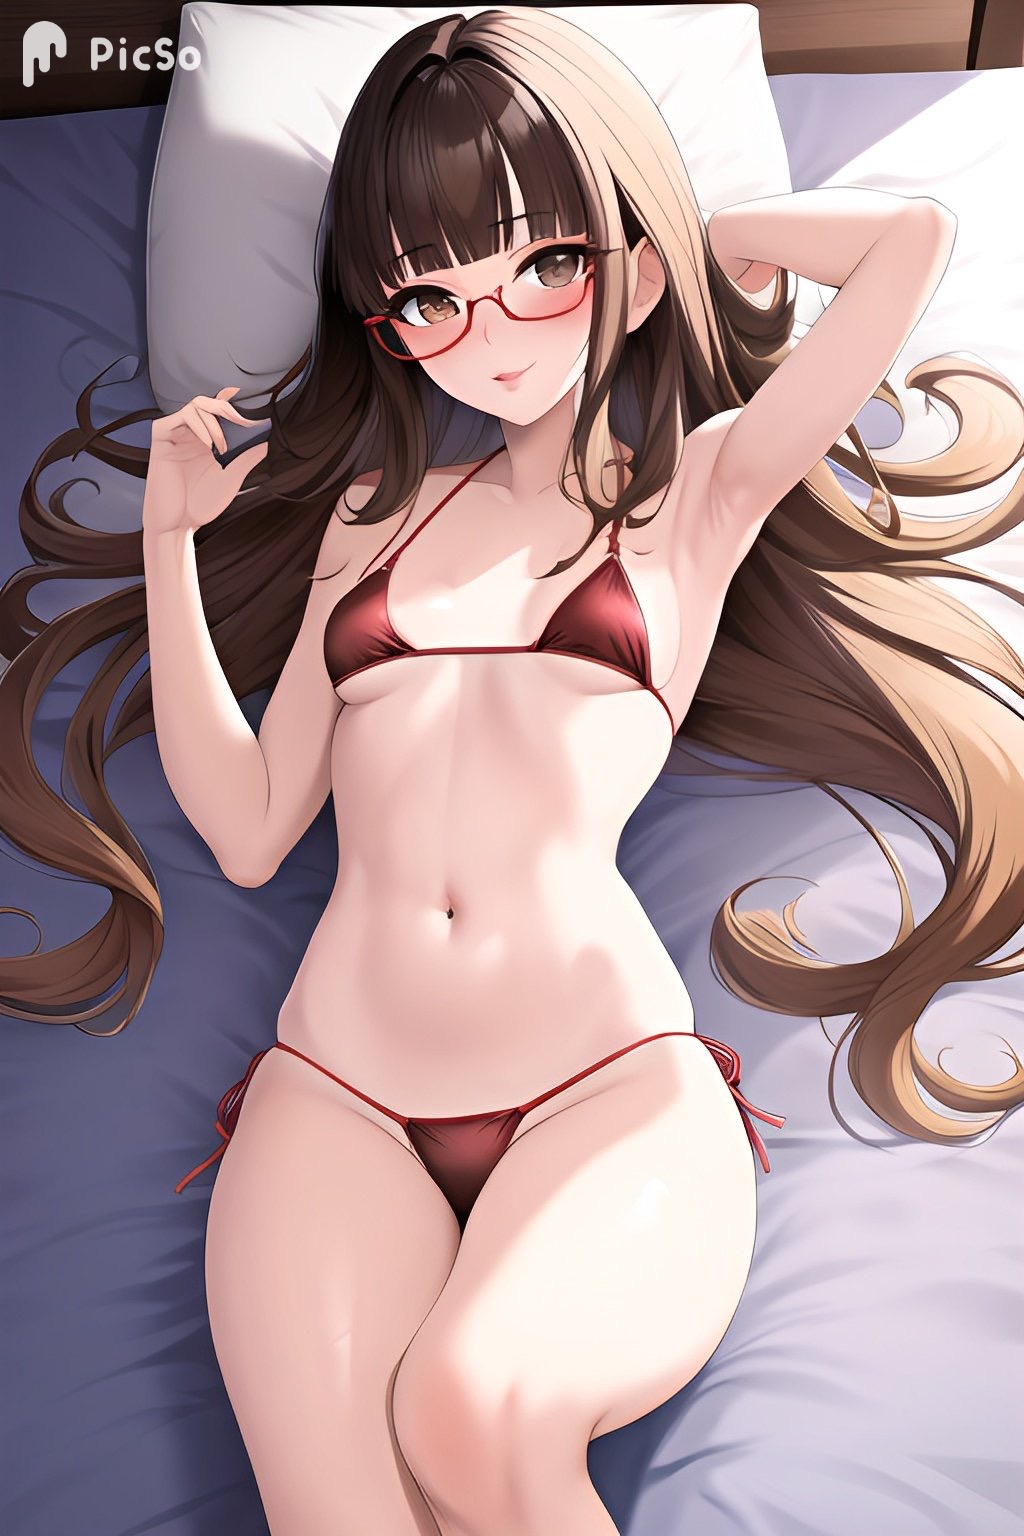 Sexy girl with glasses and small tits by snakebitesss on DeviantArt